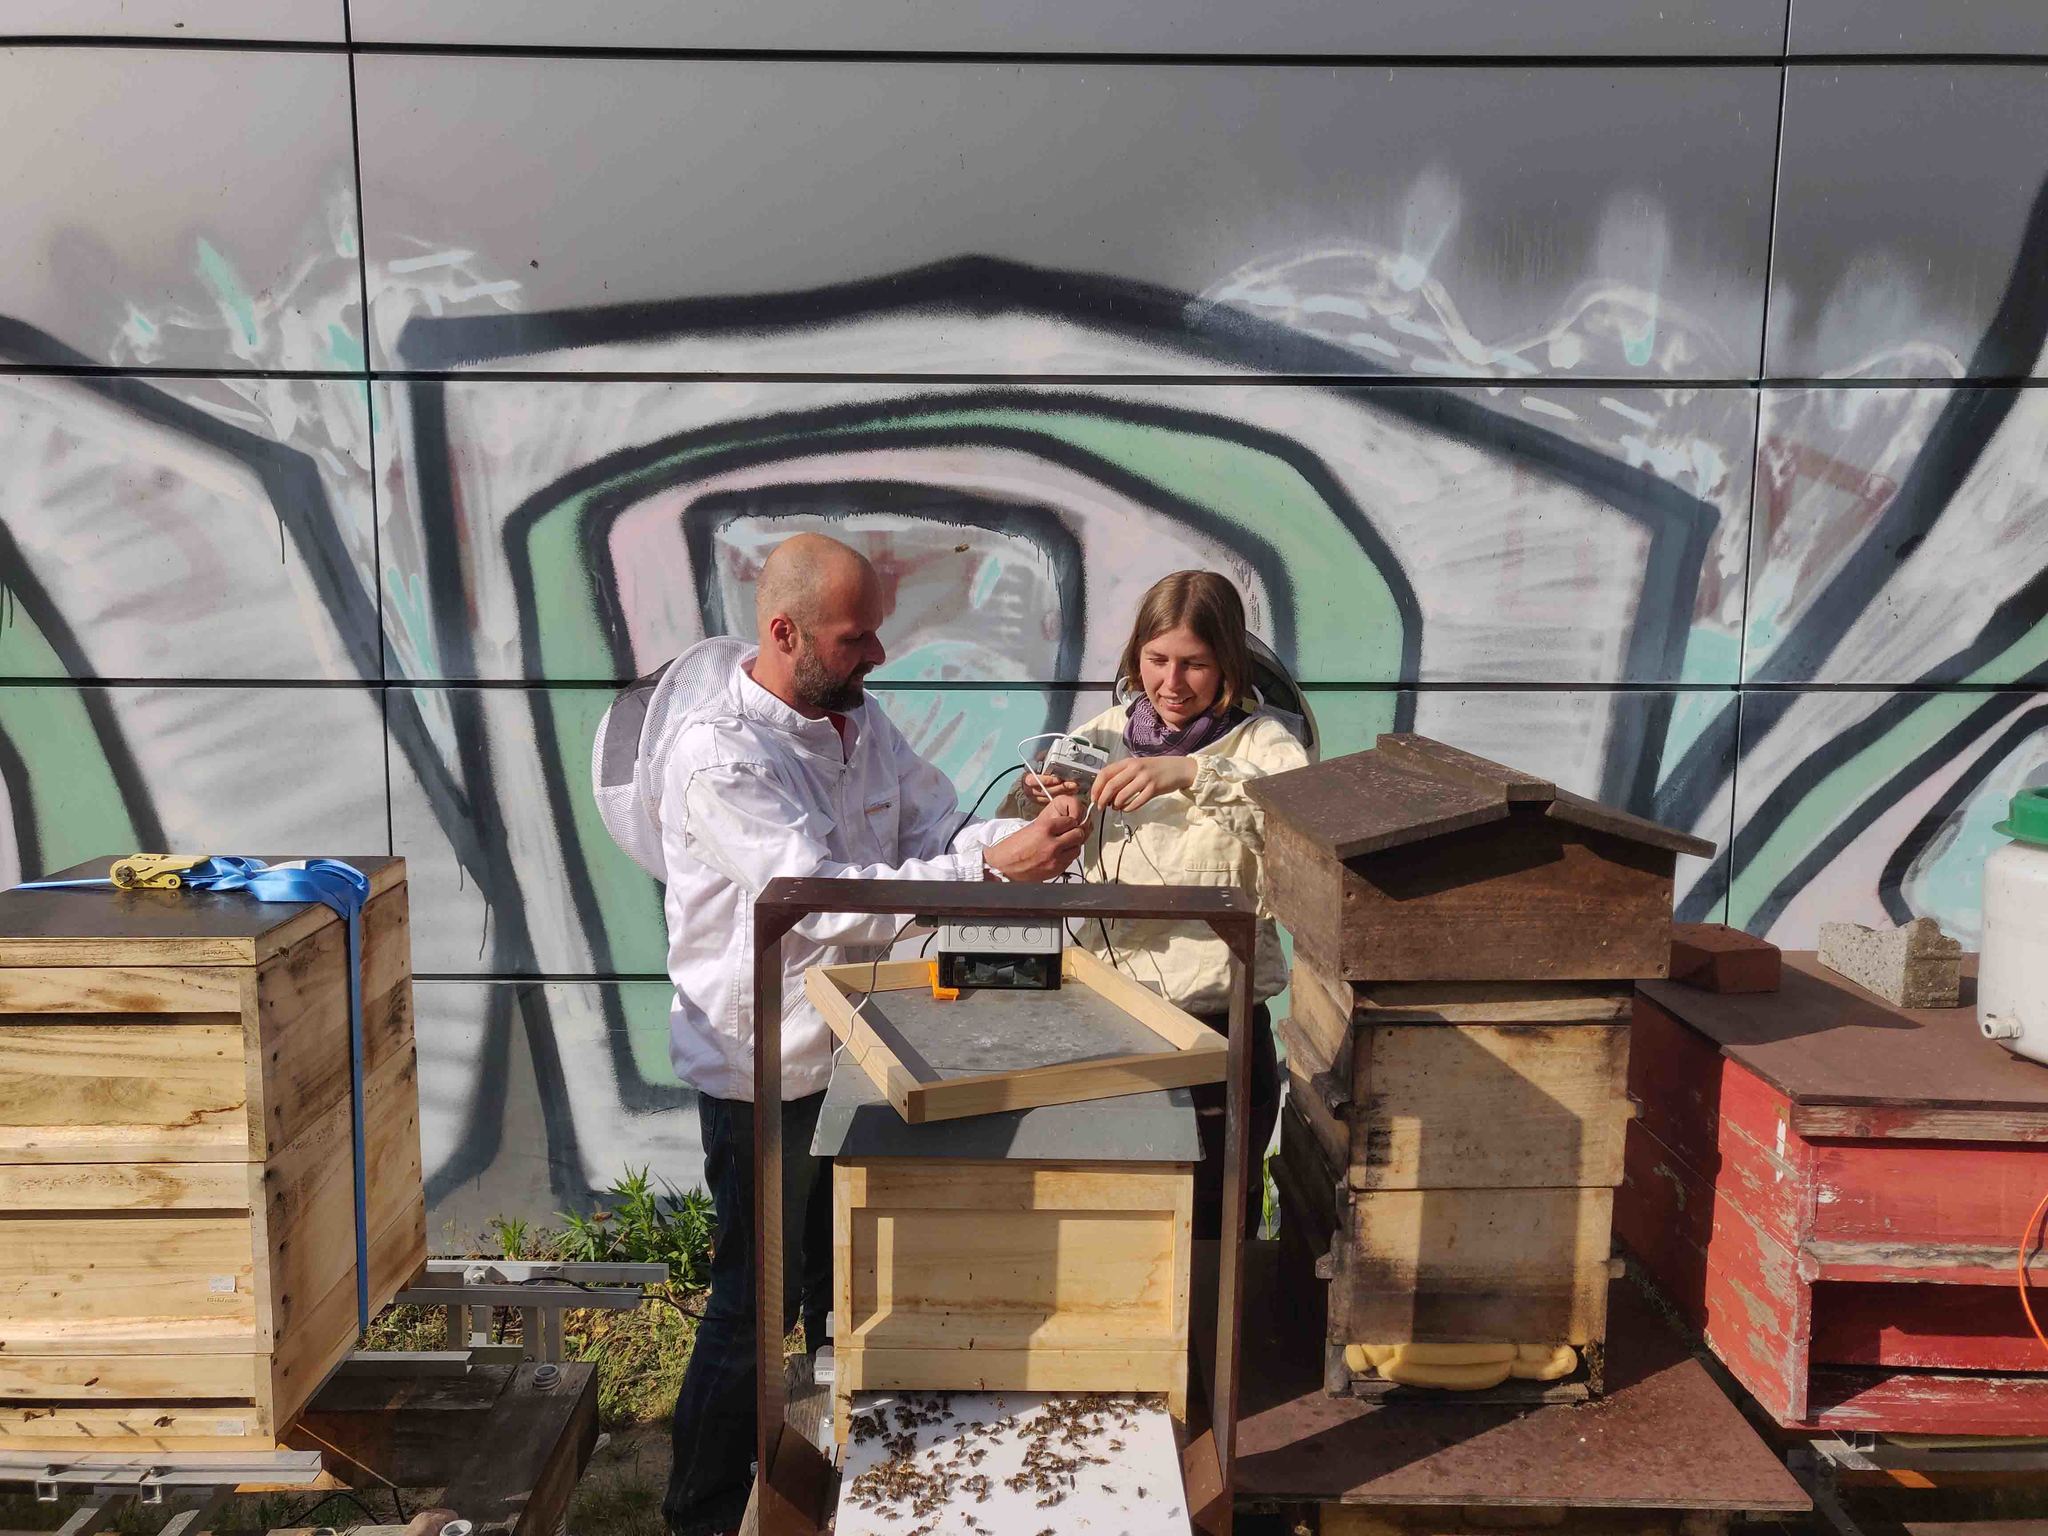 The Bremen researchers Thorsten Kluß and Diren Senger next to the beehives at the University of Bremen. These hives are monitored with sensor technology.